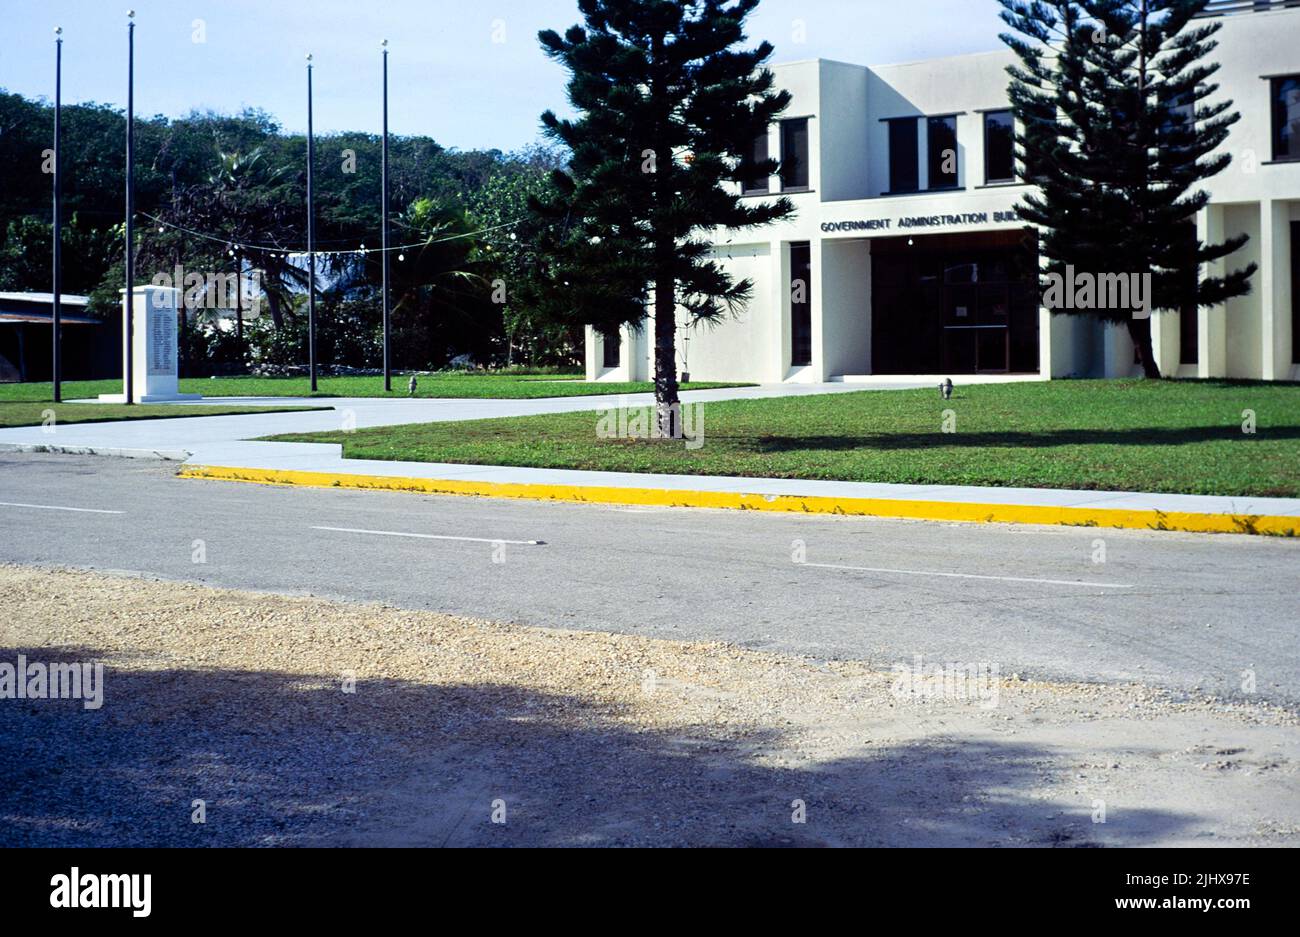 Government administration building, Stake Bay, Cayman Brac, Cayman Islands, West Indies c 1990 Stock Photo